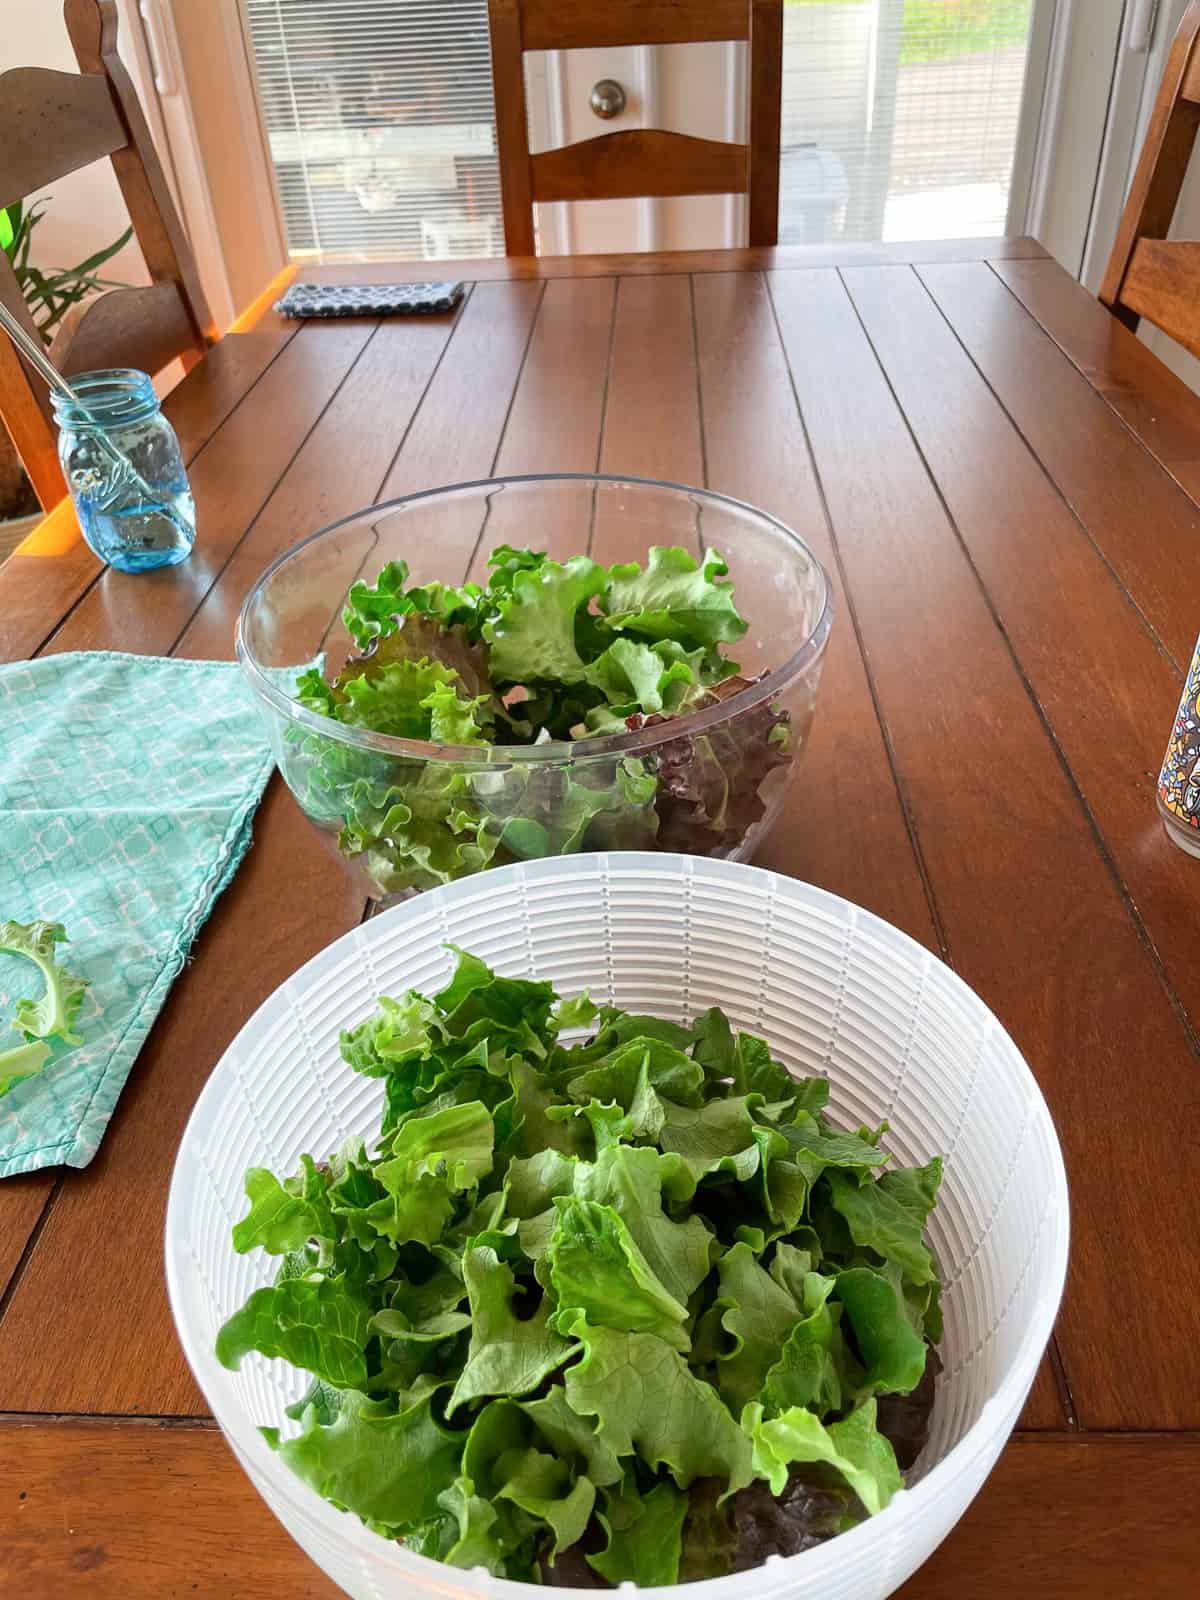 a basket of lettuce on a table.